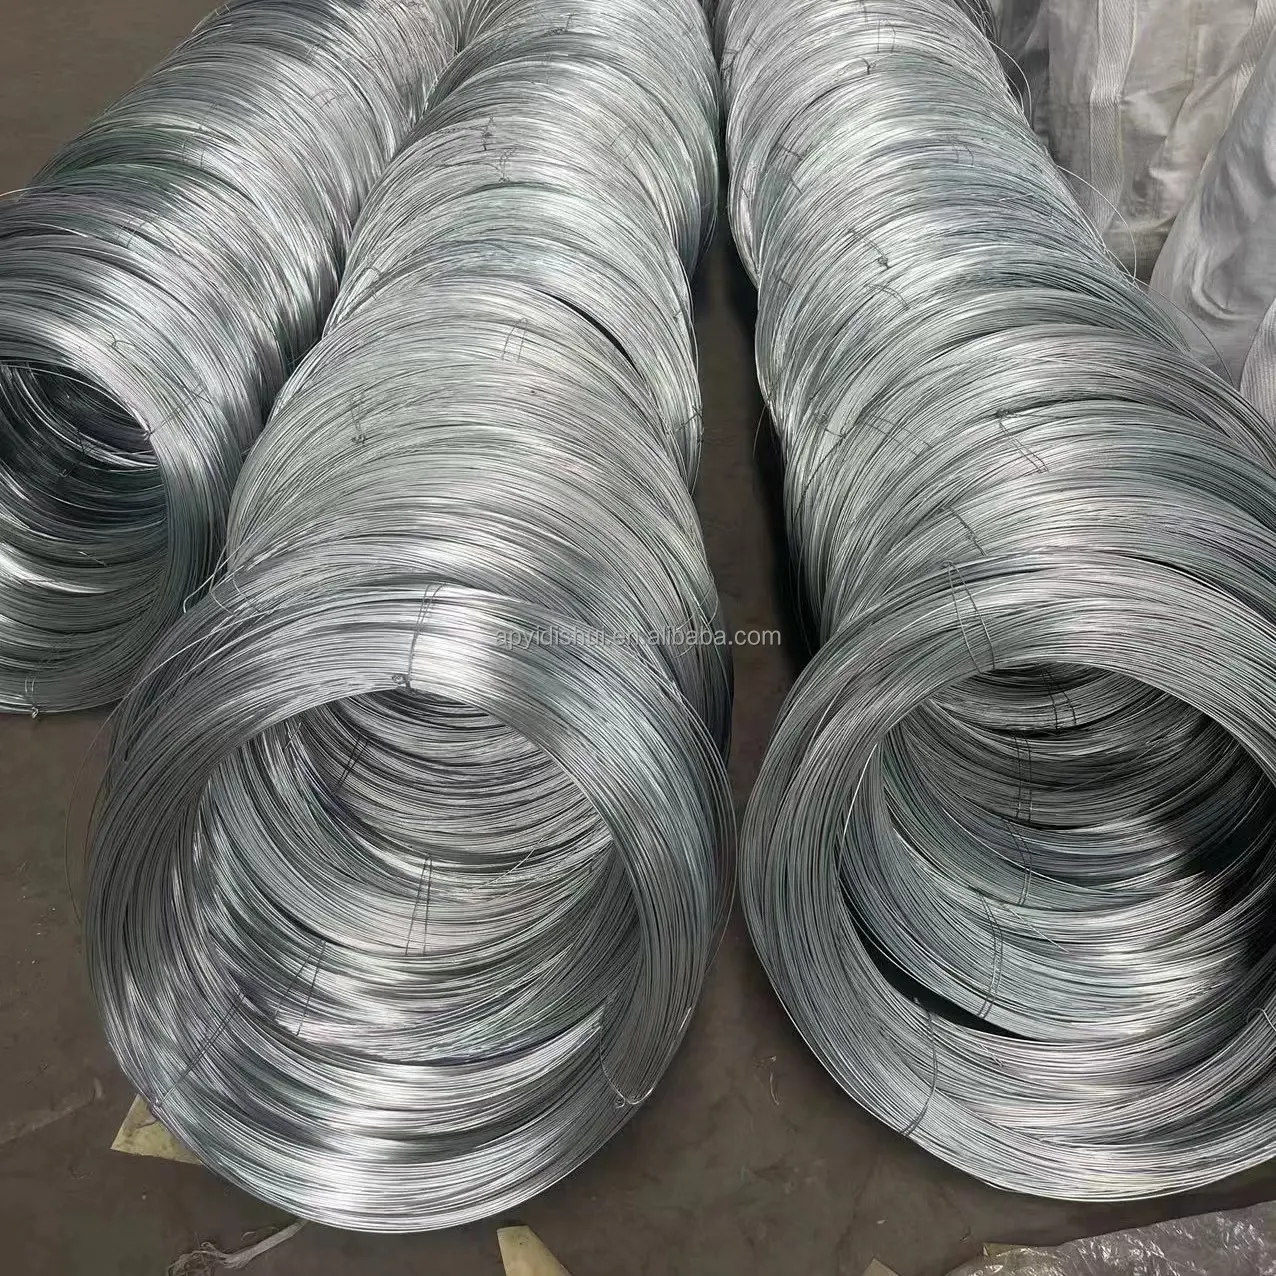 20# 21#Binding wire Hot Dipped Galvanized Steel Wire Rope Black Annealed Iron Wire